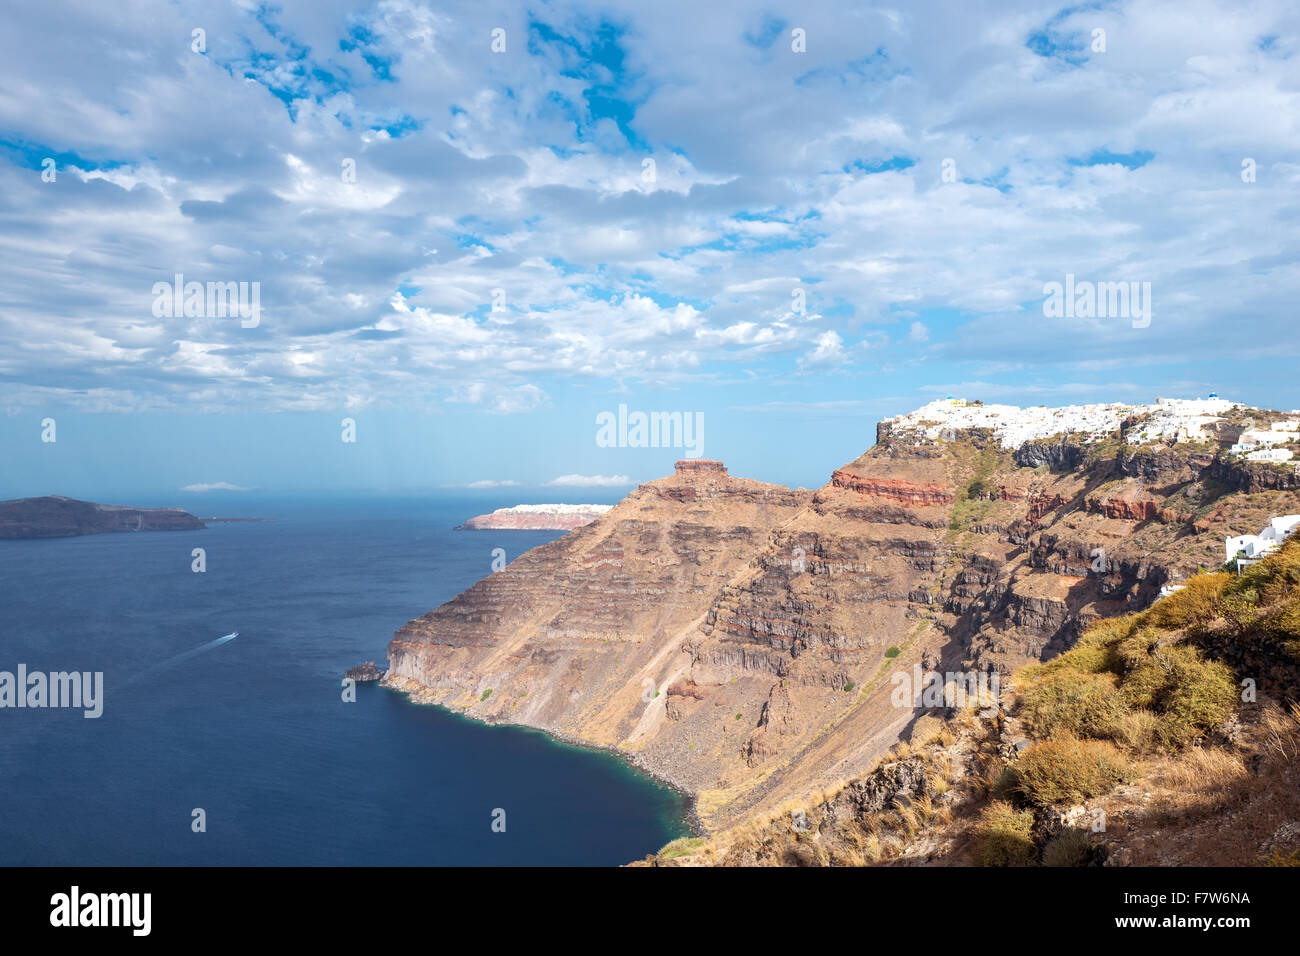 Greece, Santorini island, Fira,  panorama on the villages of Imerovigli and Oia seen from the caldera pathway Stock Photo